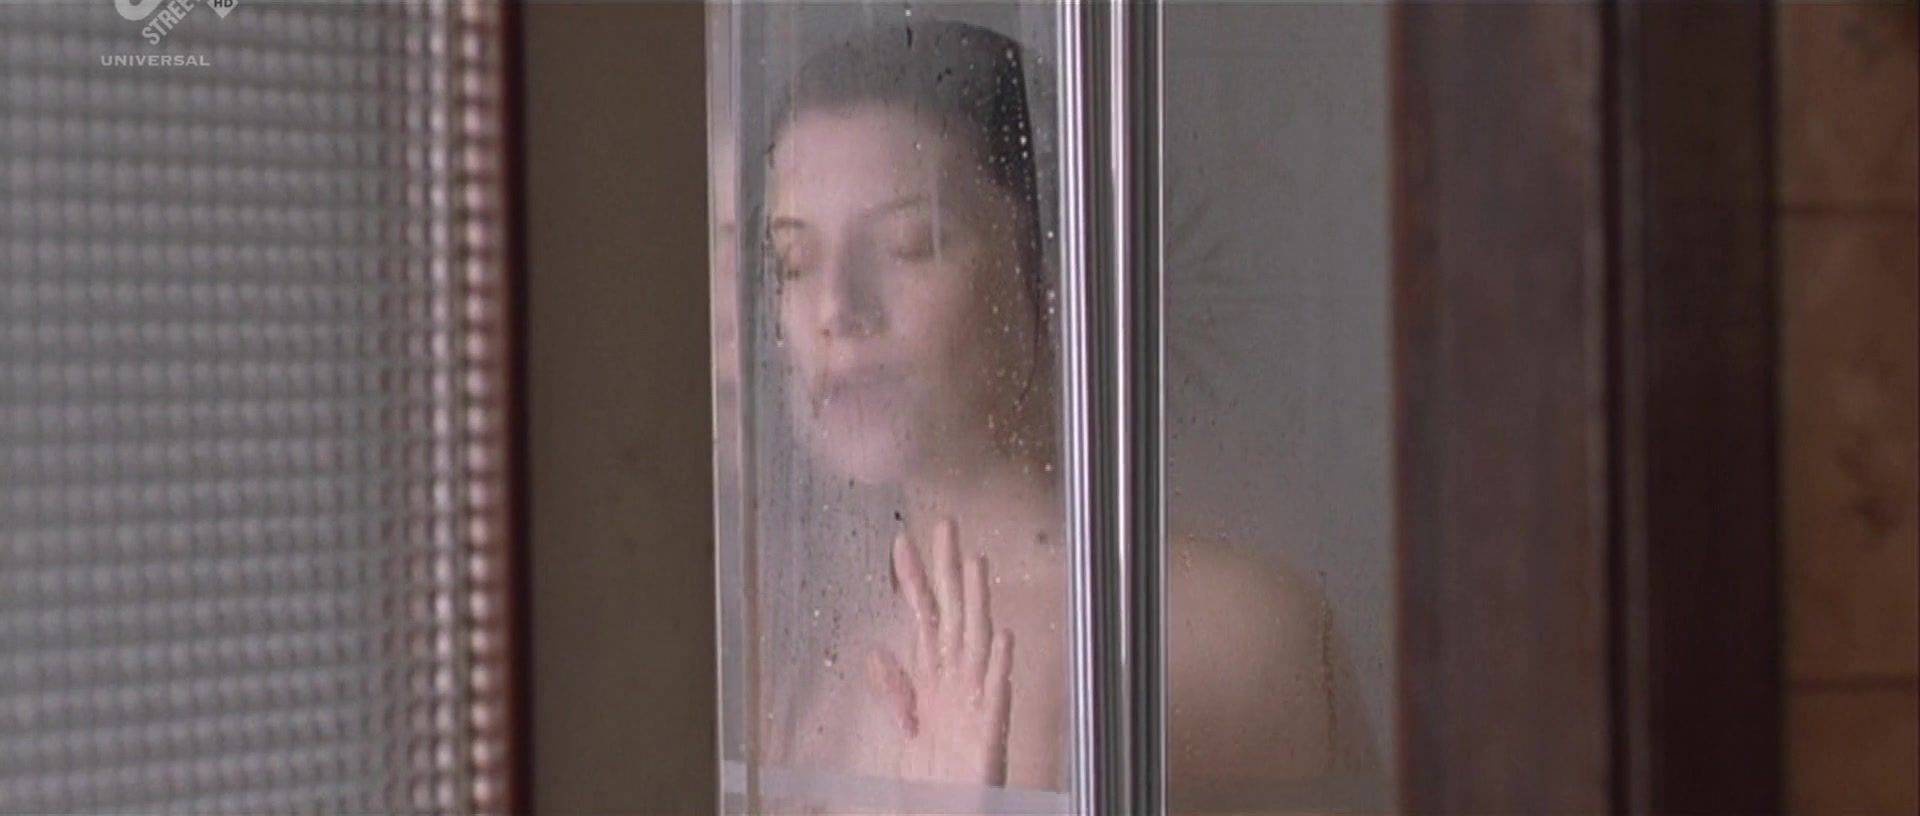 Gay Boy Porn Topless Melanie Laurent from Shower Video of the French movie "La chambre des morts" Point Of View